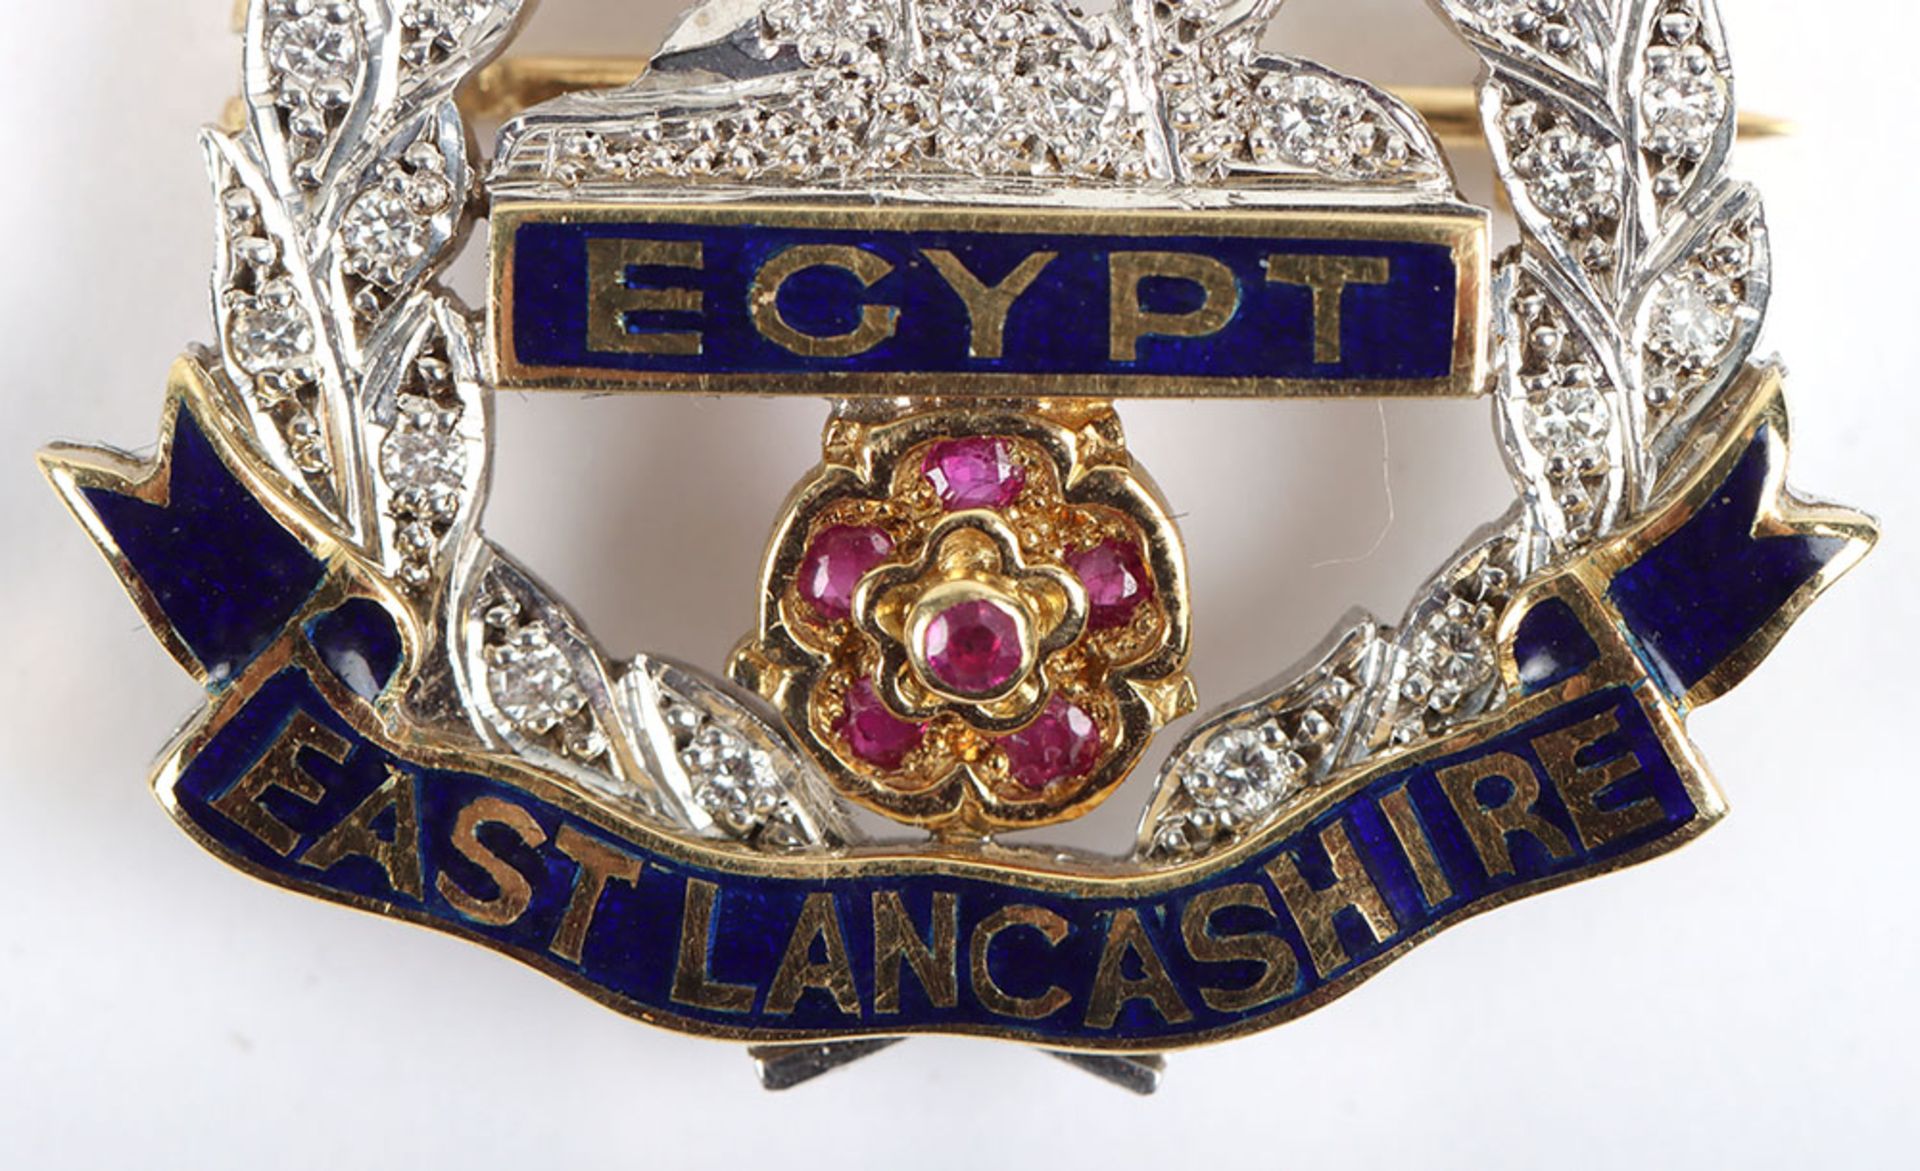 18ct Gold Diamond and Ruby Brooch of the East Lancashire Regiment - Bild 3 aus 7